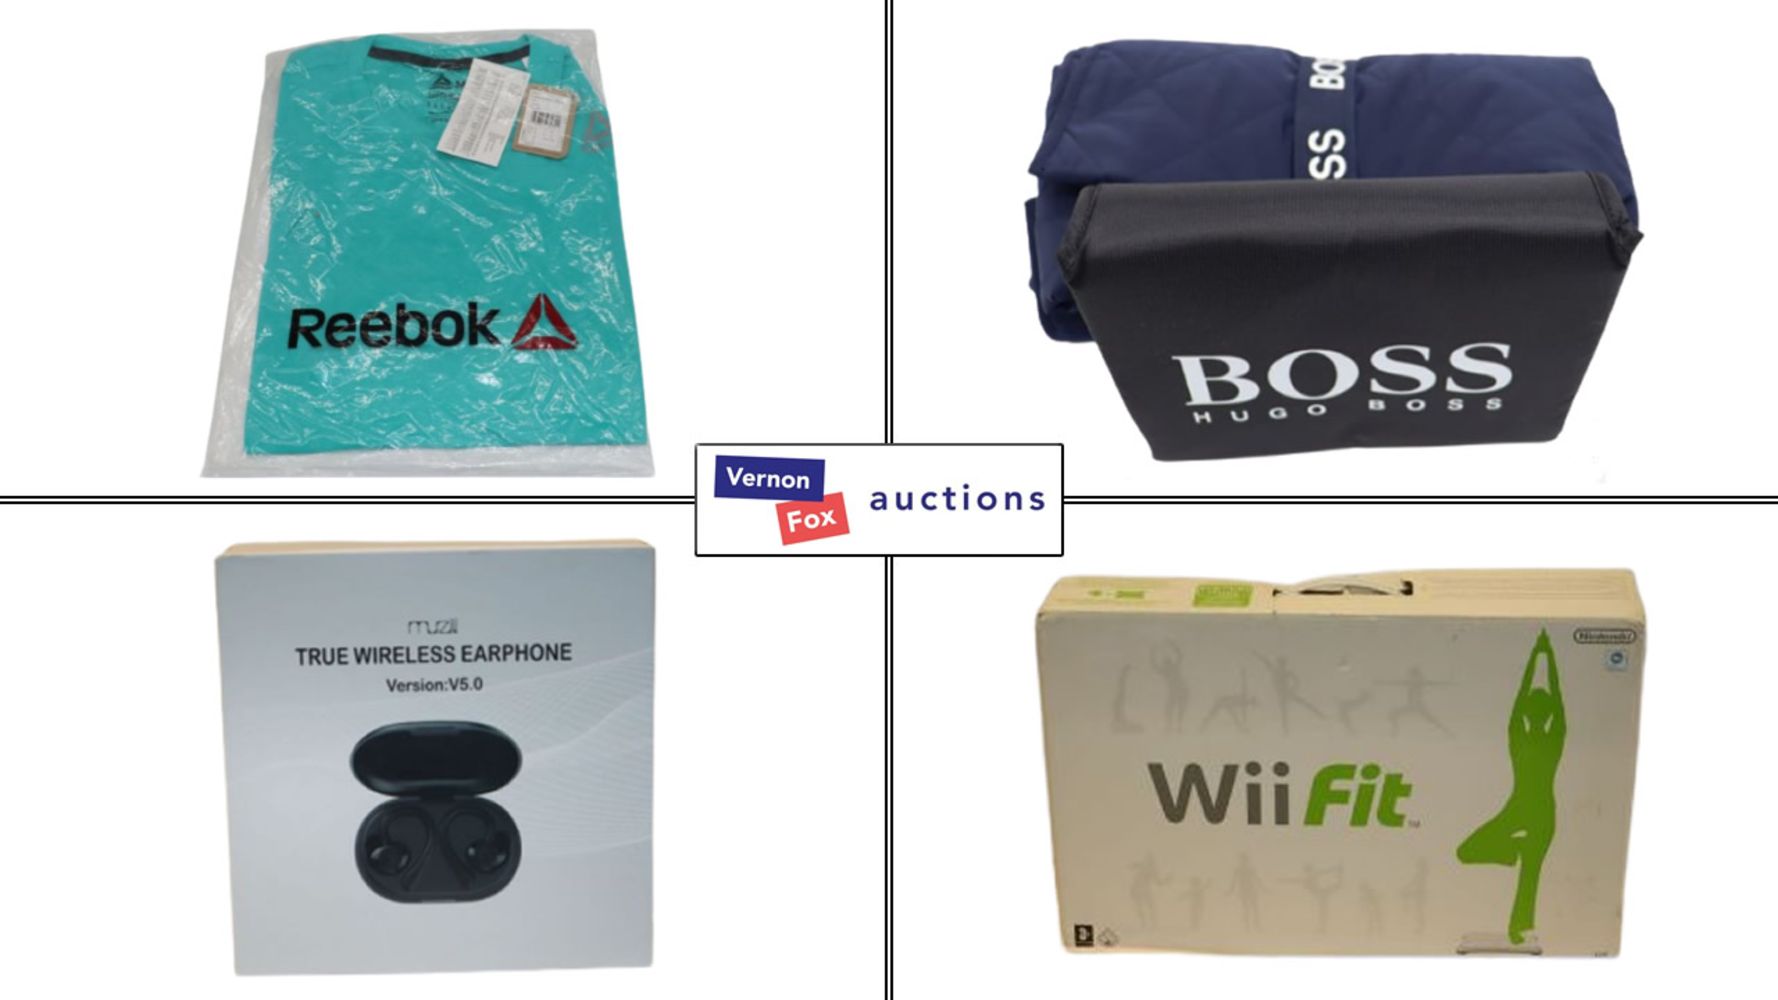 TIMED ONLINE AUCTION: Over £500,000 of Heavily Discounted Commercial Goods including Homewares, Tech, Clothing and more, with FREE UK DELIVERY!